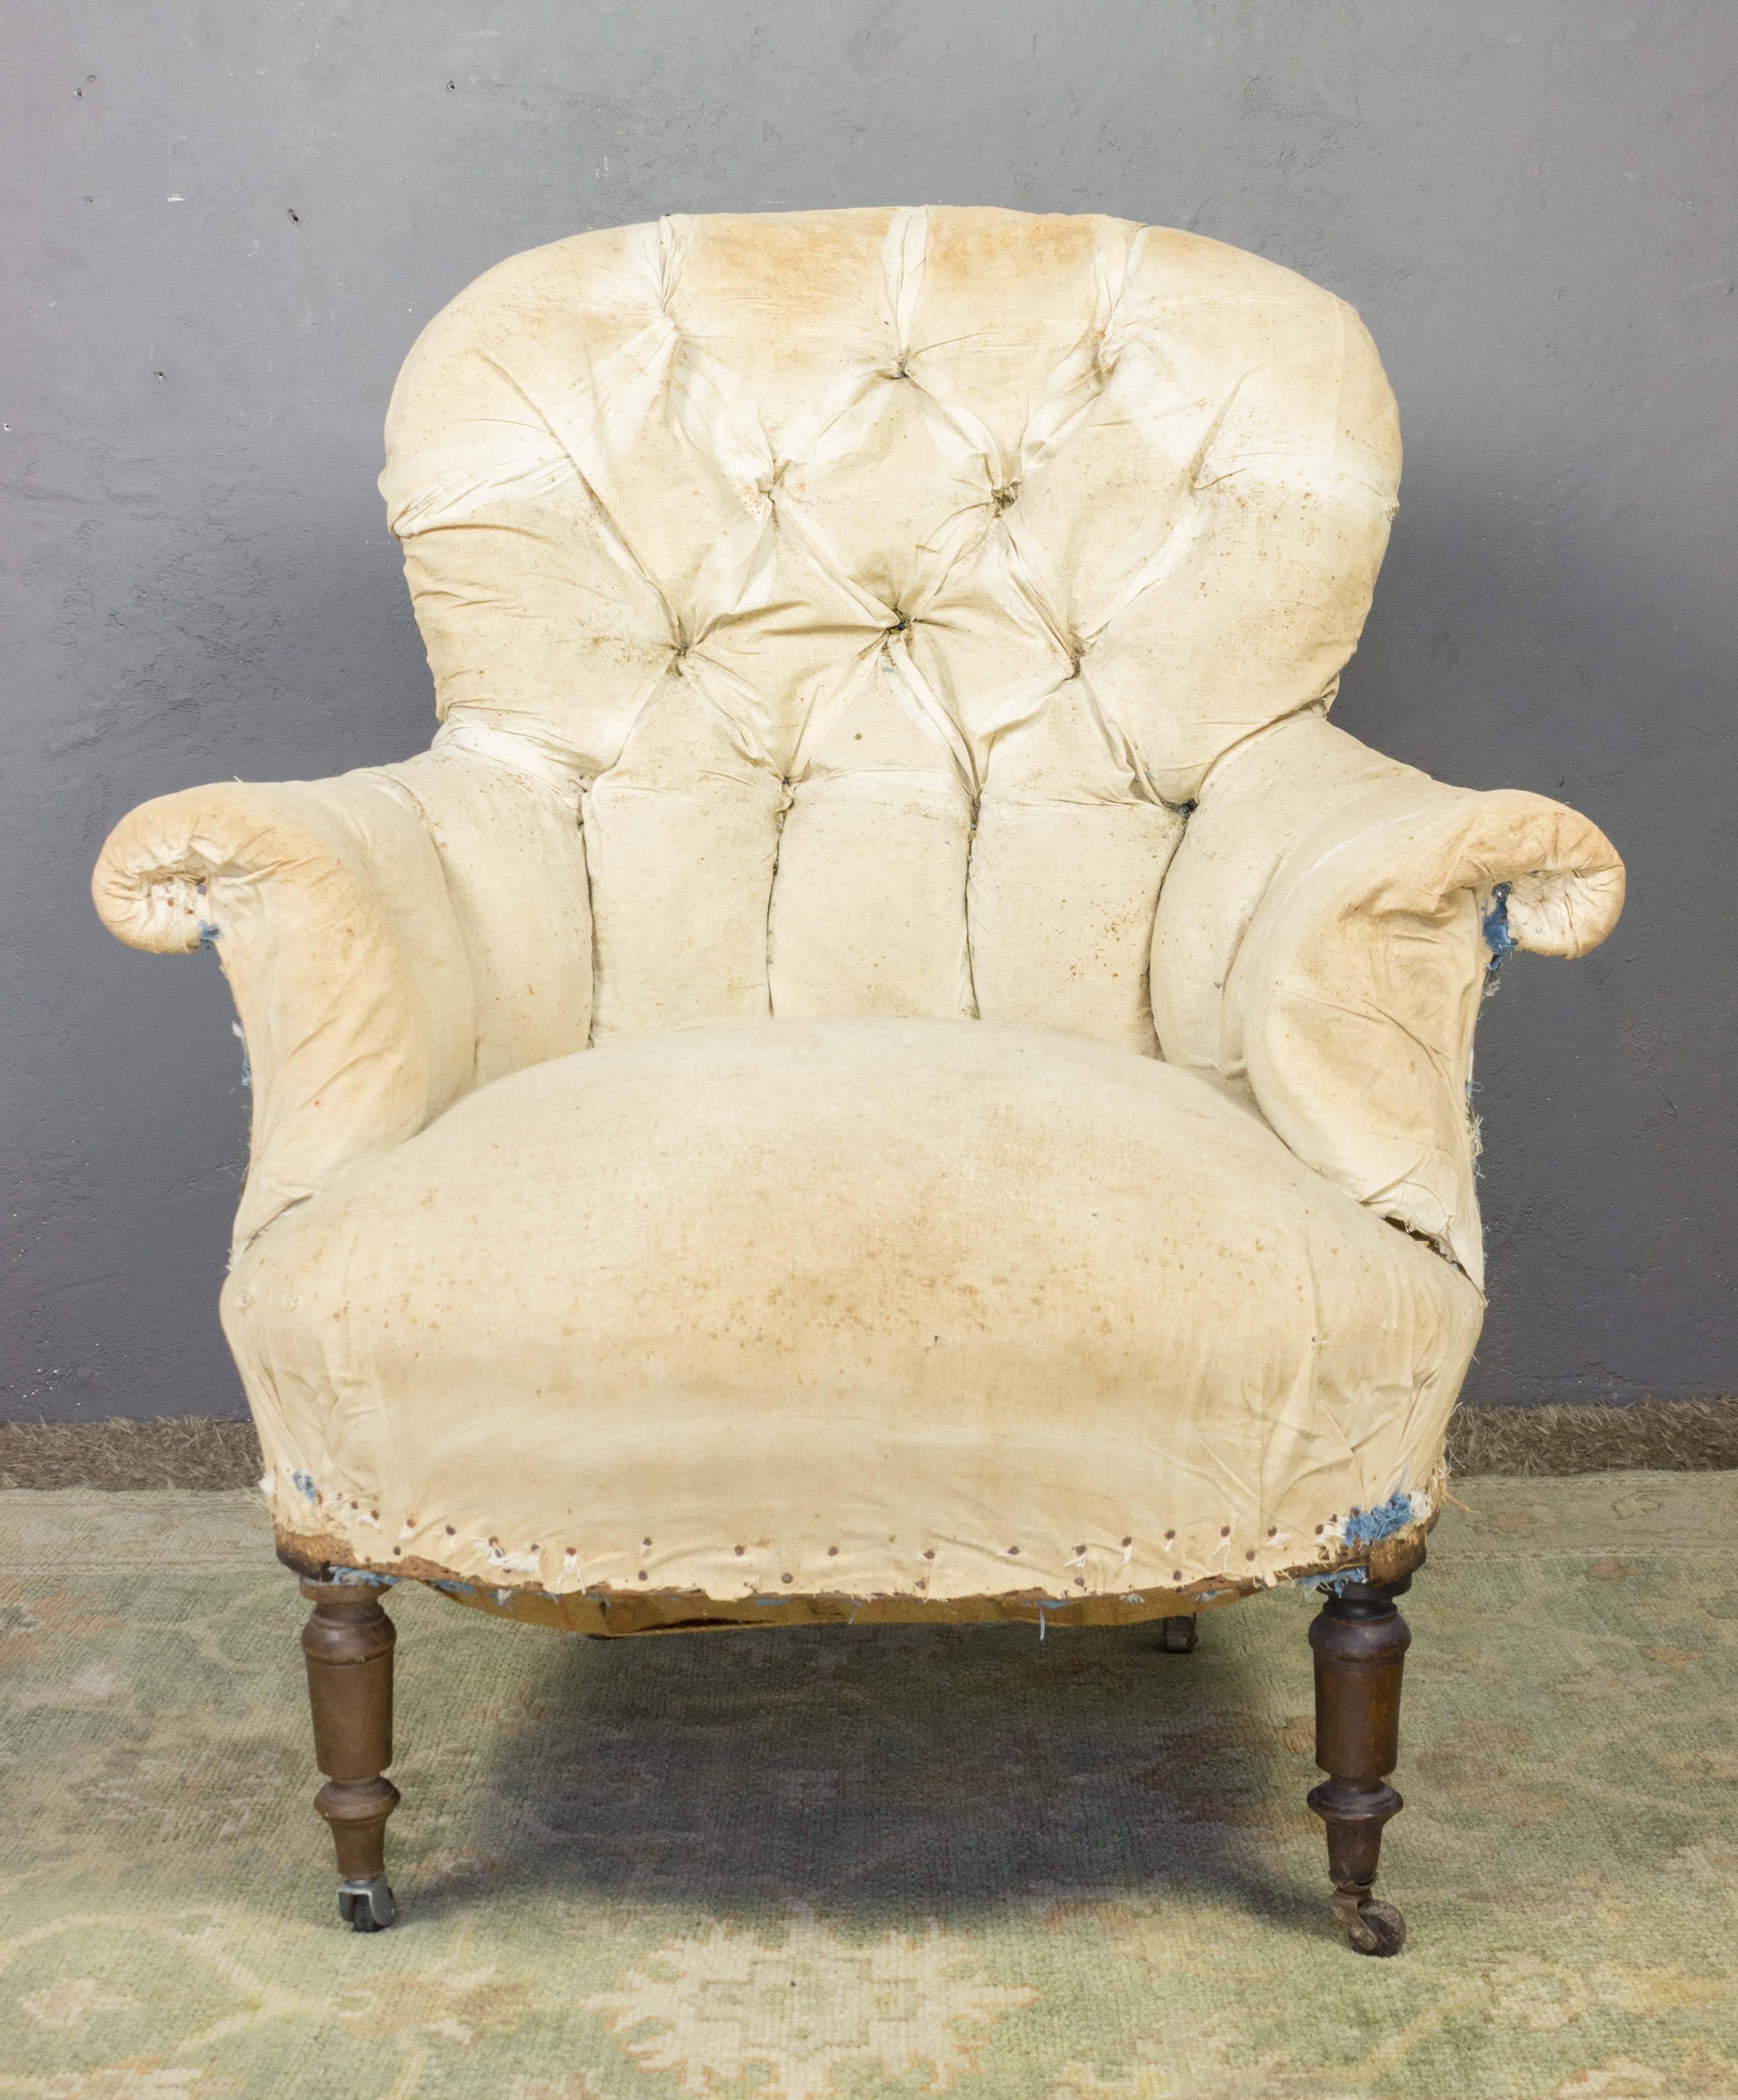 Pair of mid-19th century French armchairs with rounded tufted back. Stripped down to original muslin.